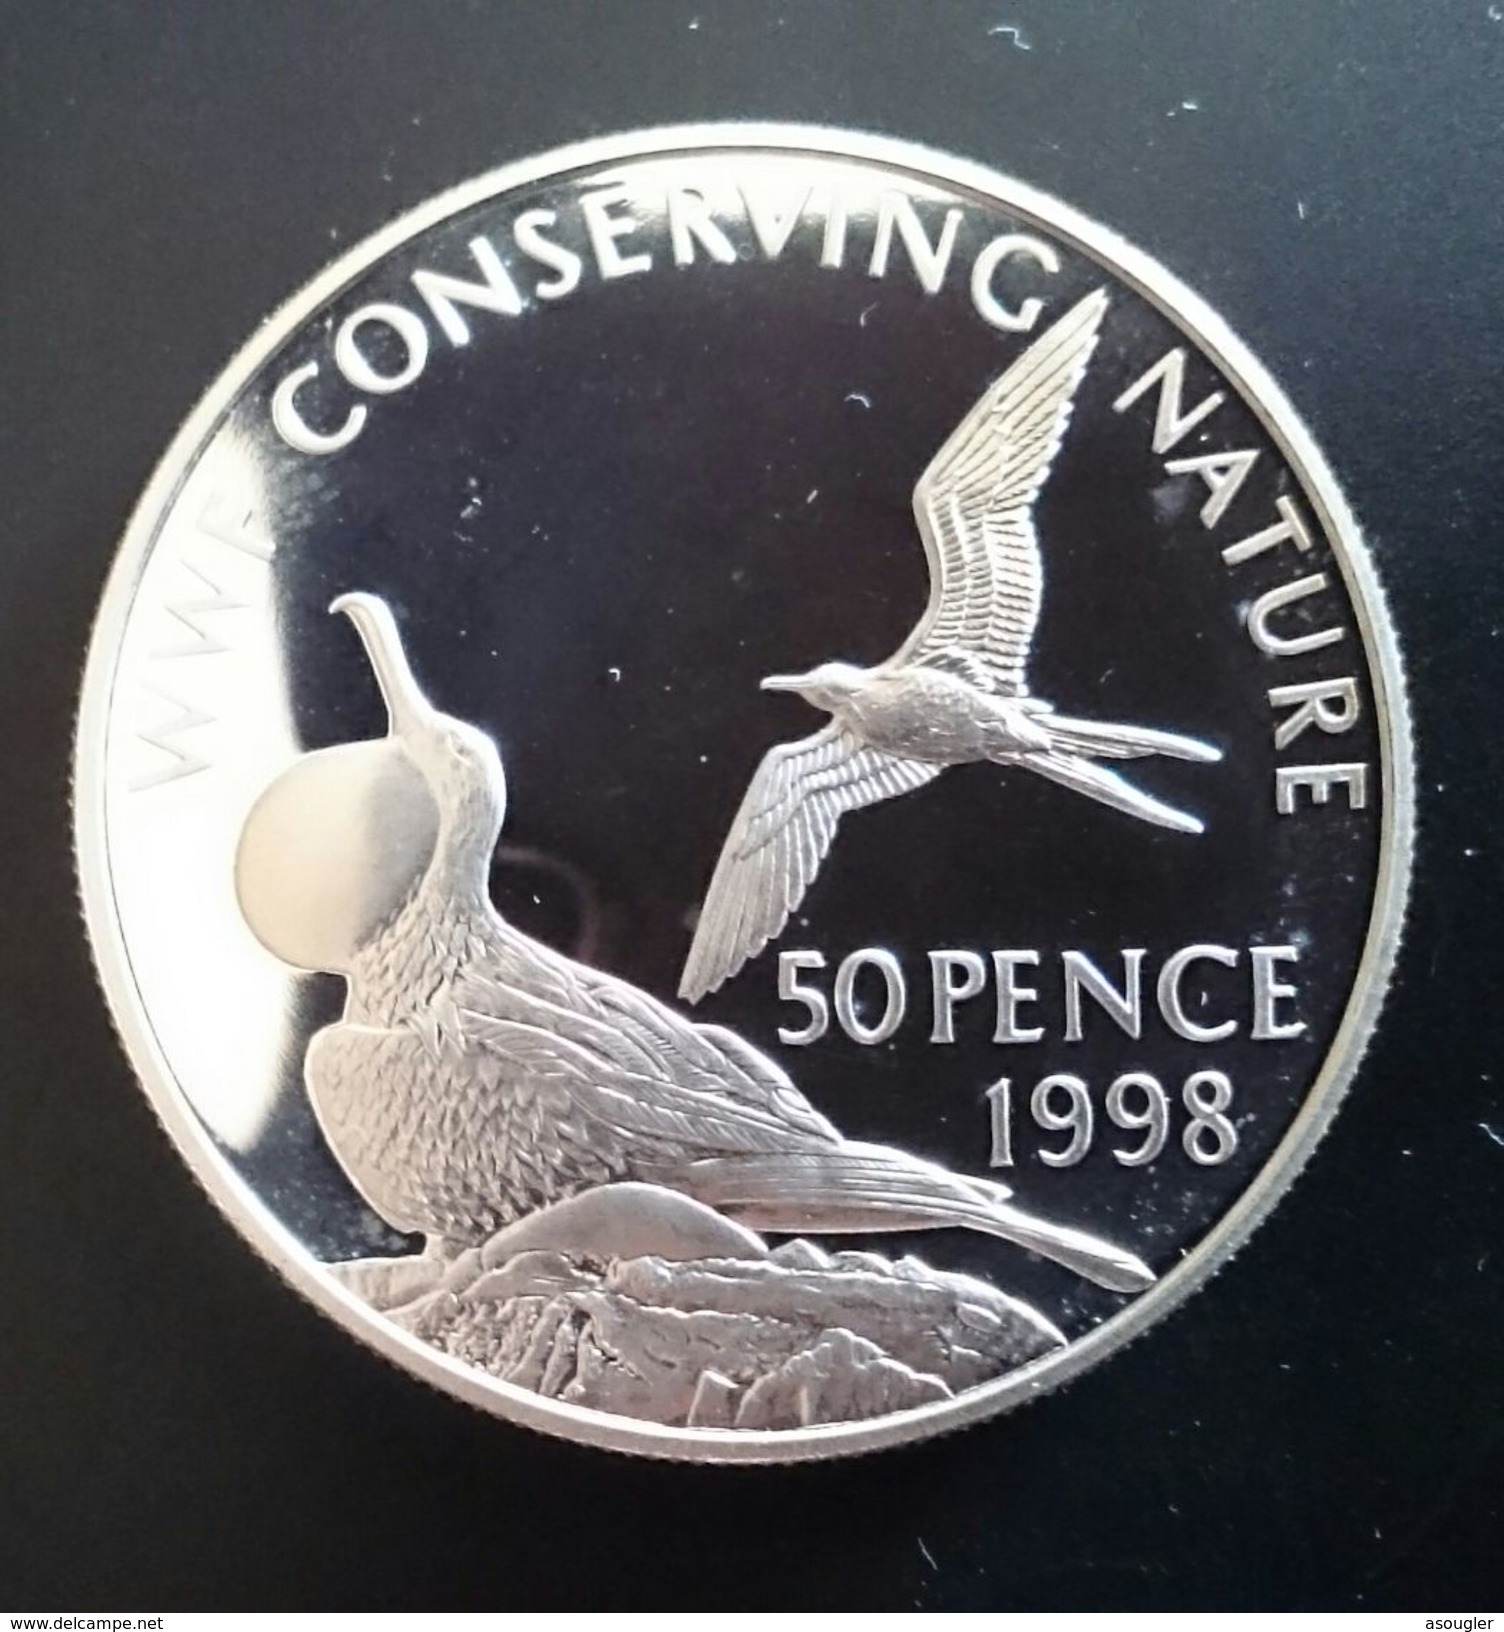 ASCENSION ISLAND 50 PENCE 1998 SILVER PROOF "World Wildlife Fund - Conserving Nature" Free Shipping Via Registered Air - Isla Ascensión